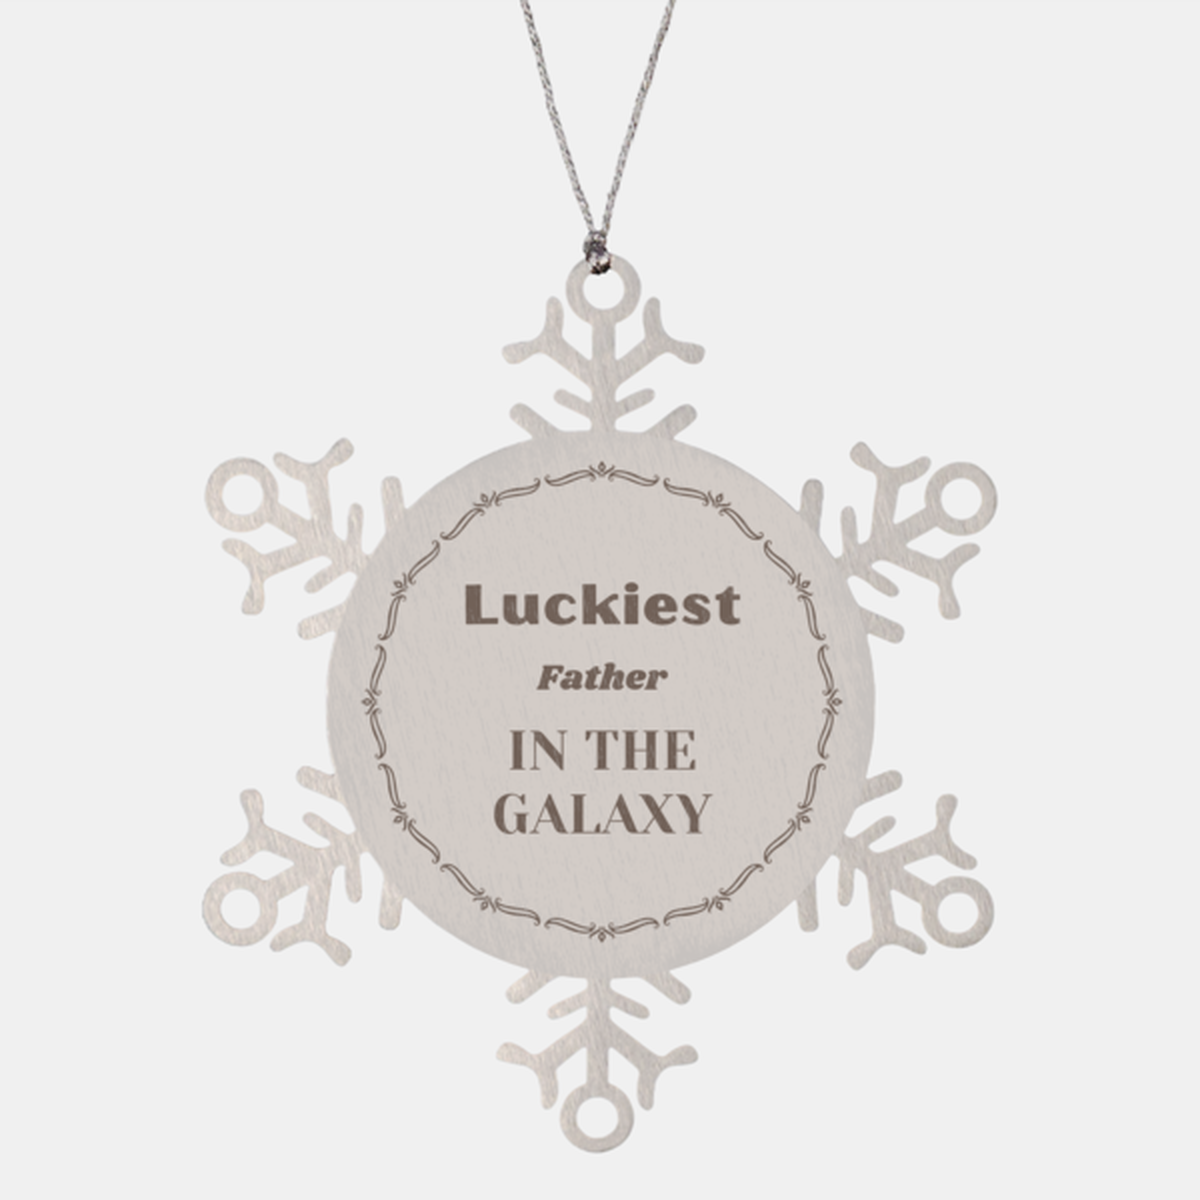 Luckiest Father in the Galaxy, To My Father Ornament Gifts, Christmas Father Snowflake Ornament Gifts, X-mas Decorations Unique Gifts For Father Men Women